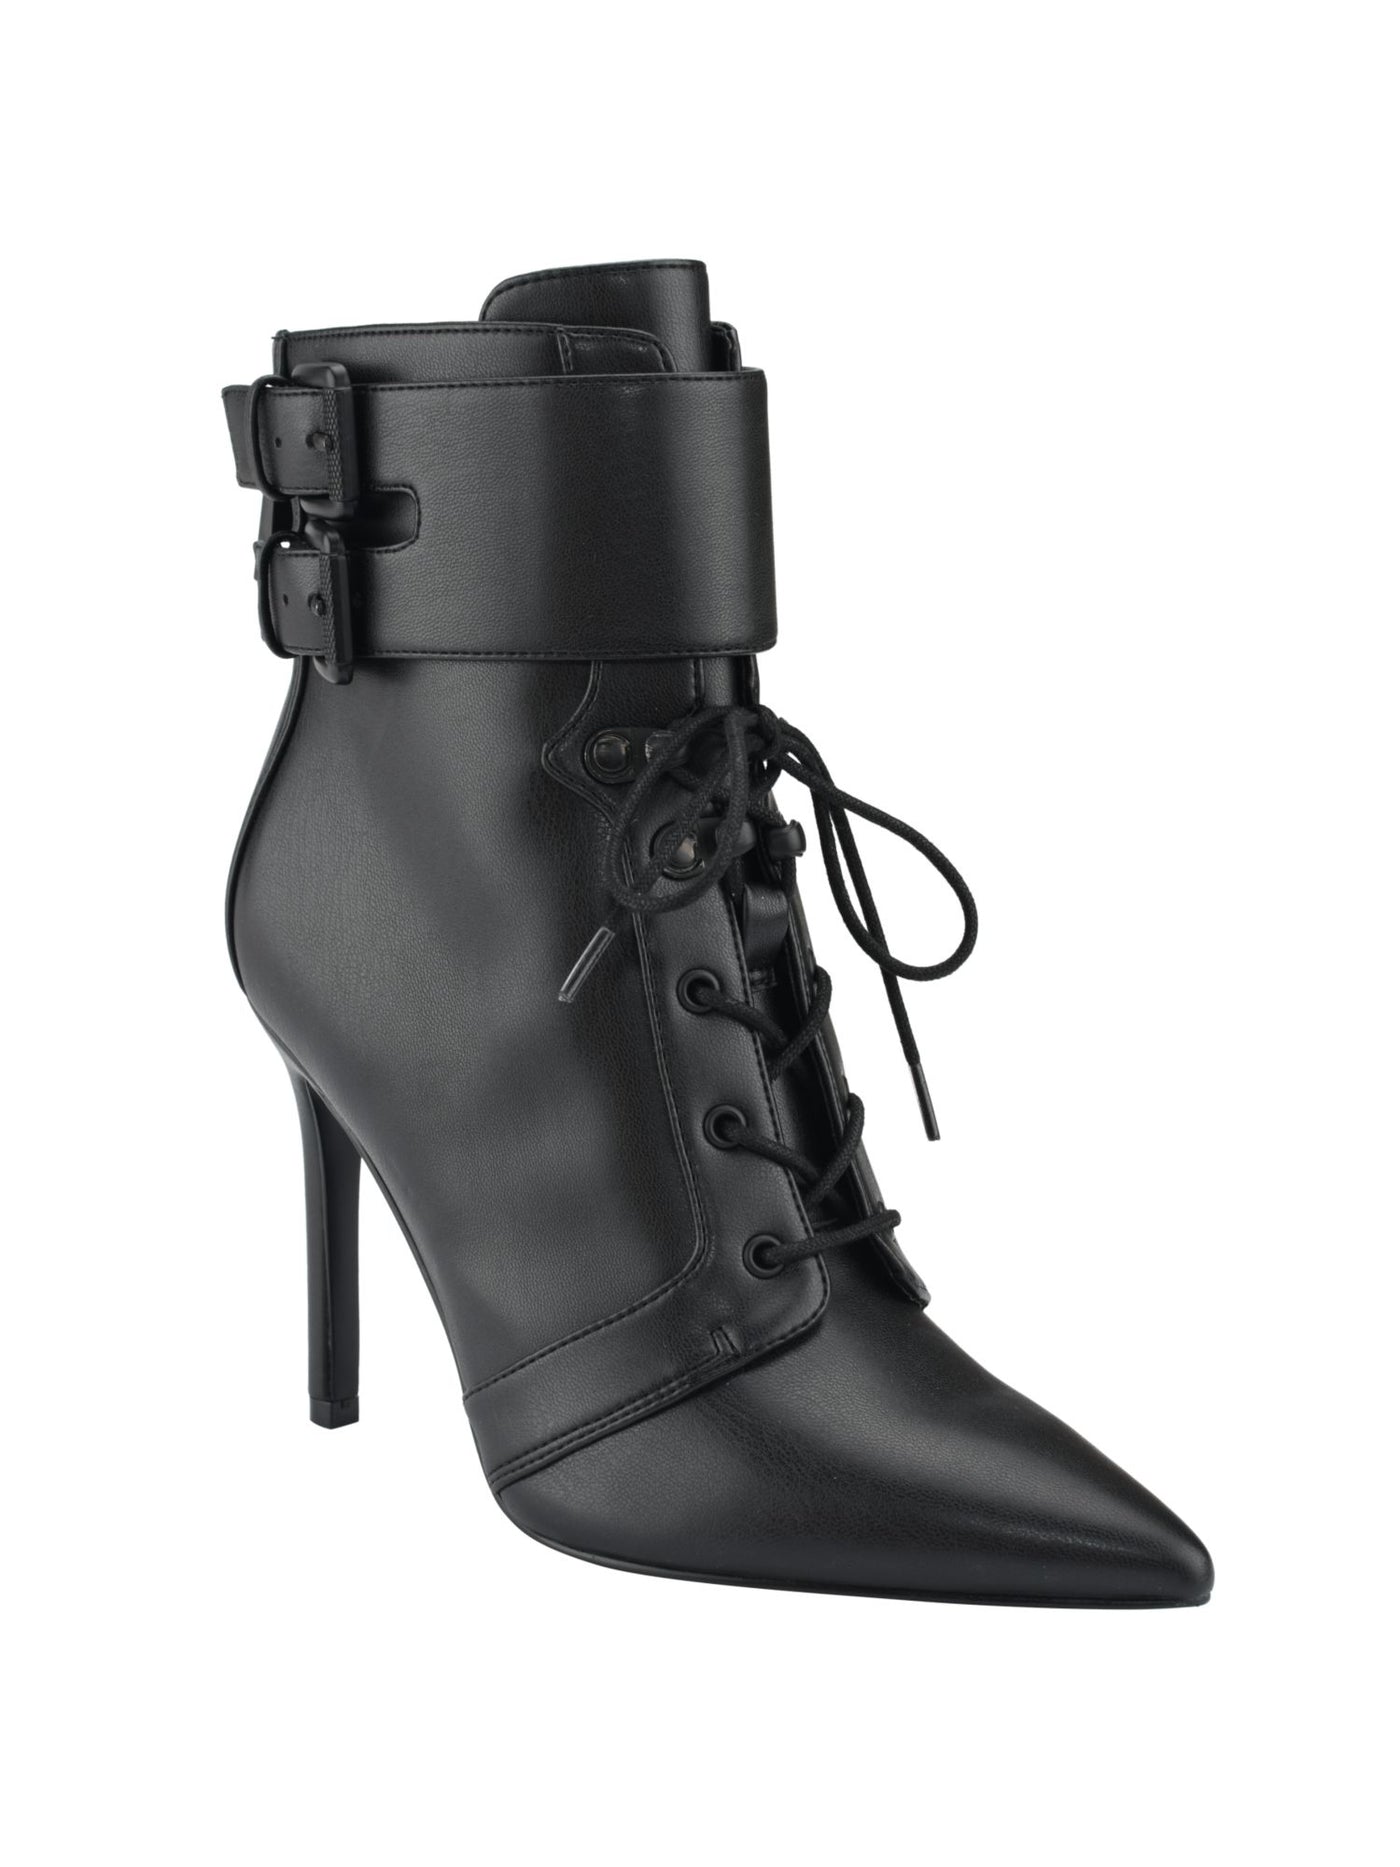 GUESS Womens Black Buckle Accent Bossi Pointy Toe Stiletto Lace-Up Dress Booties 11 M